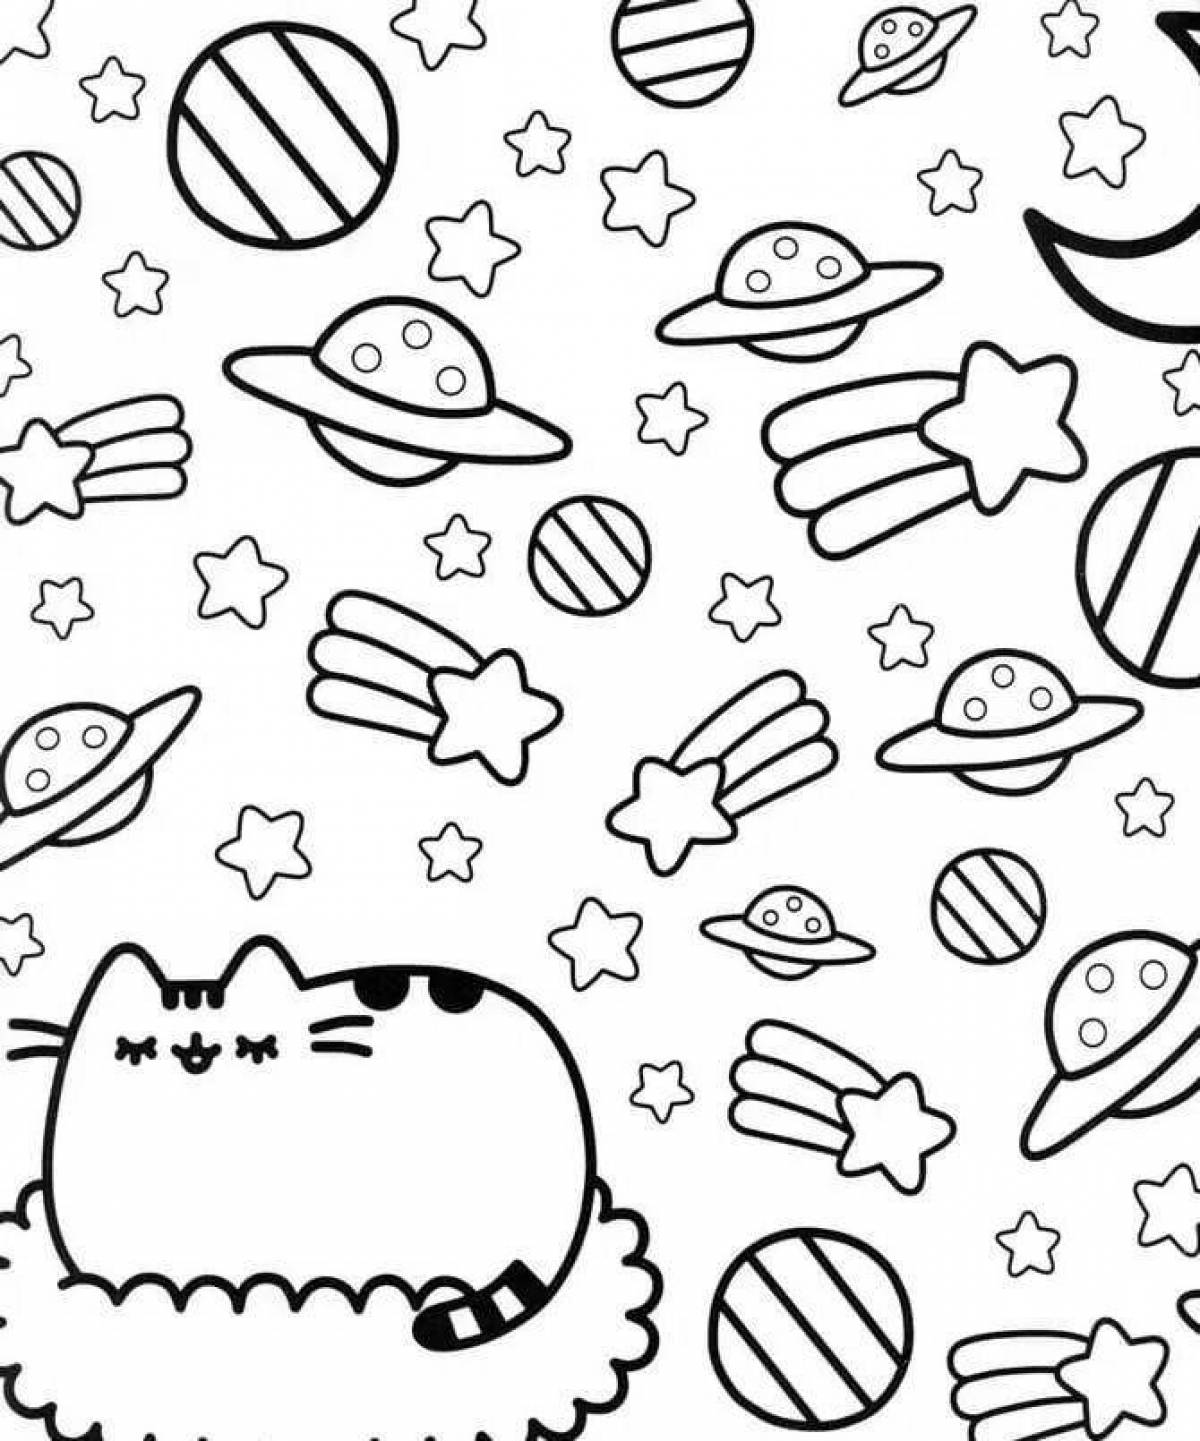 Cute and mischievous cat coloring book